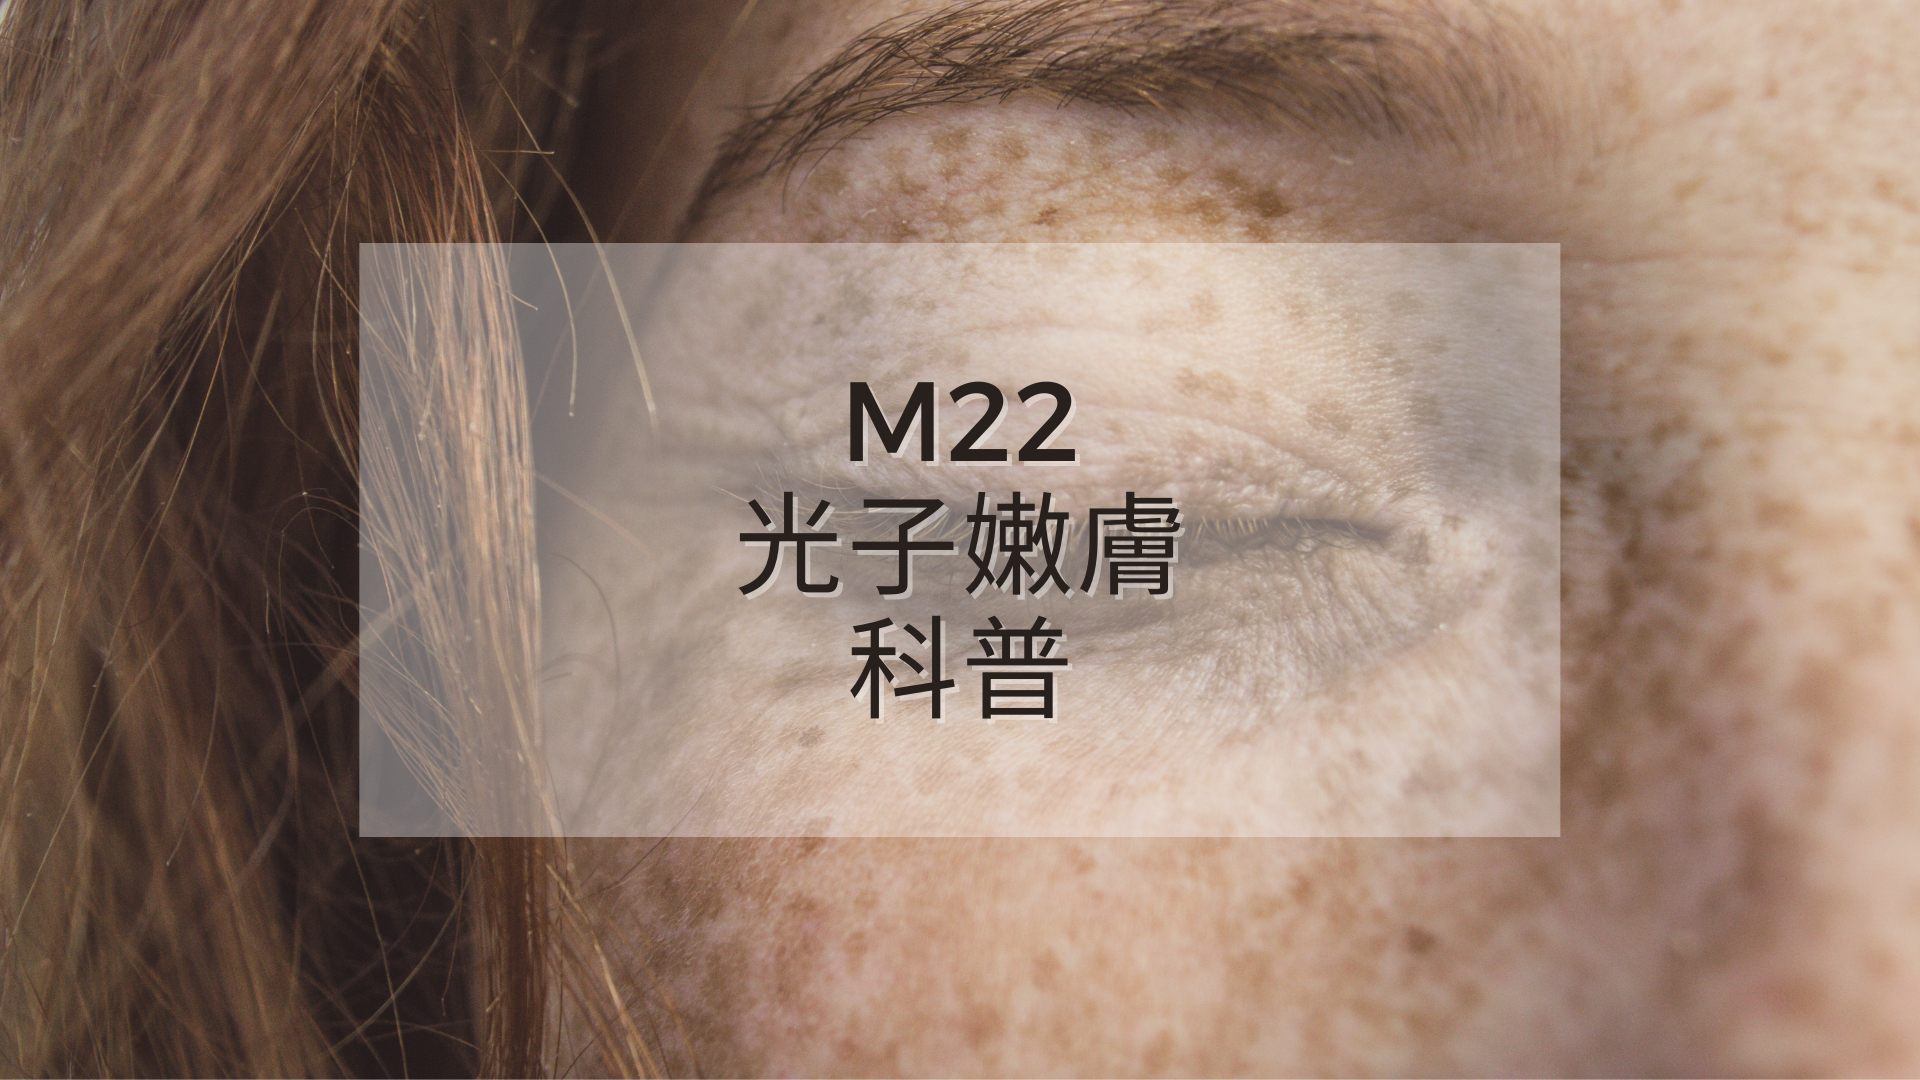 You are currently viewing M22光子嫩膚科普